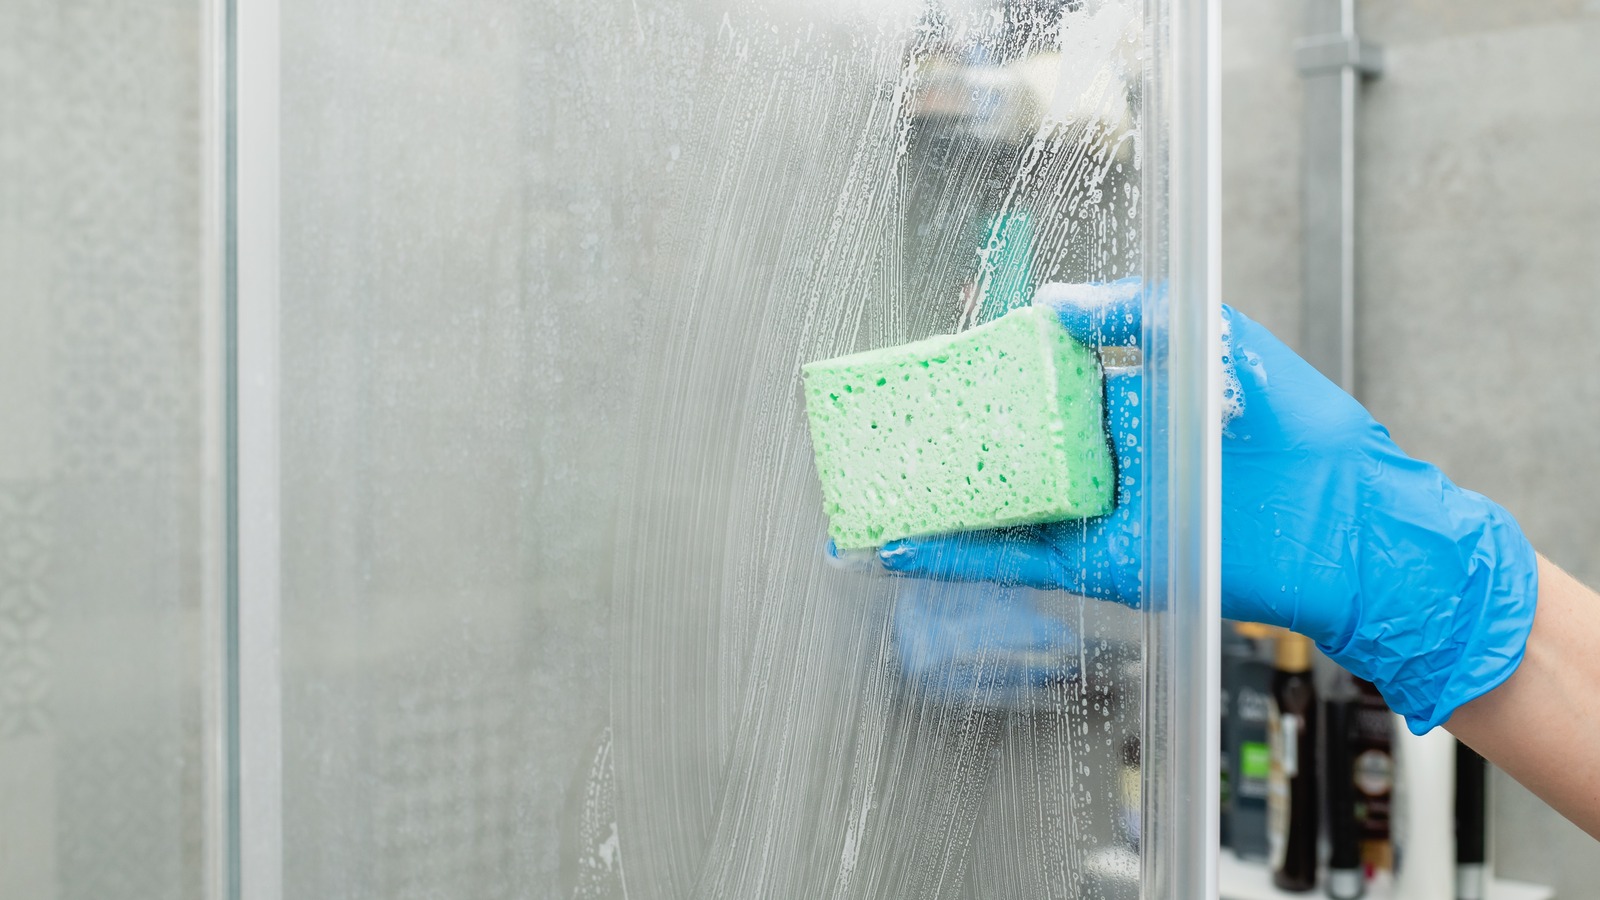 Glass Shower Cleaning Hacks